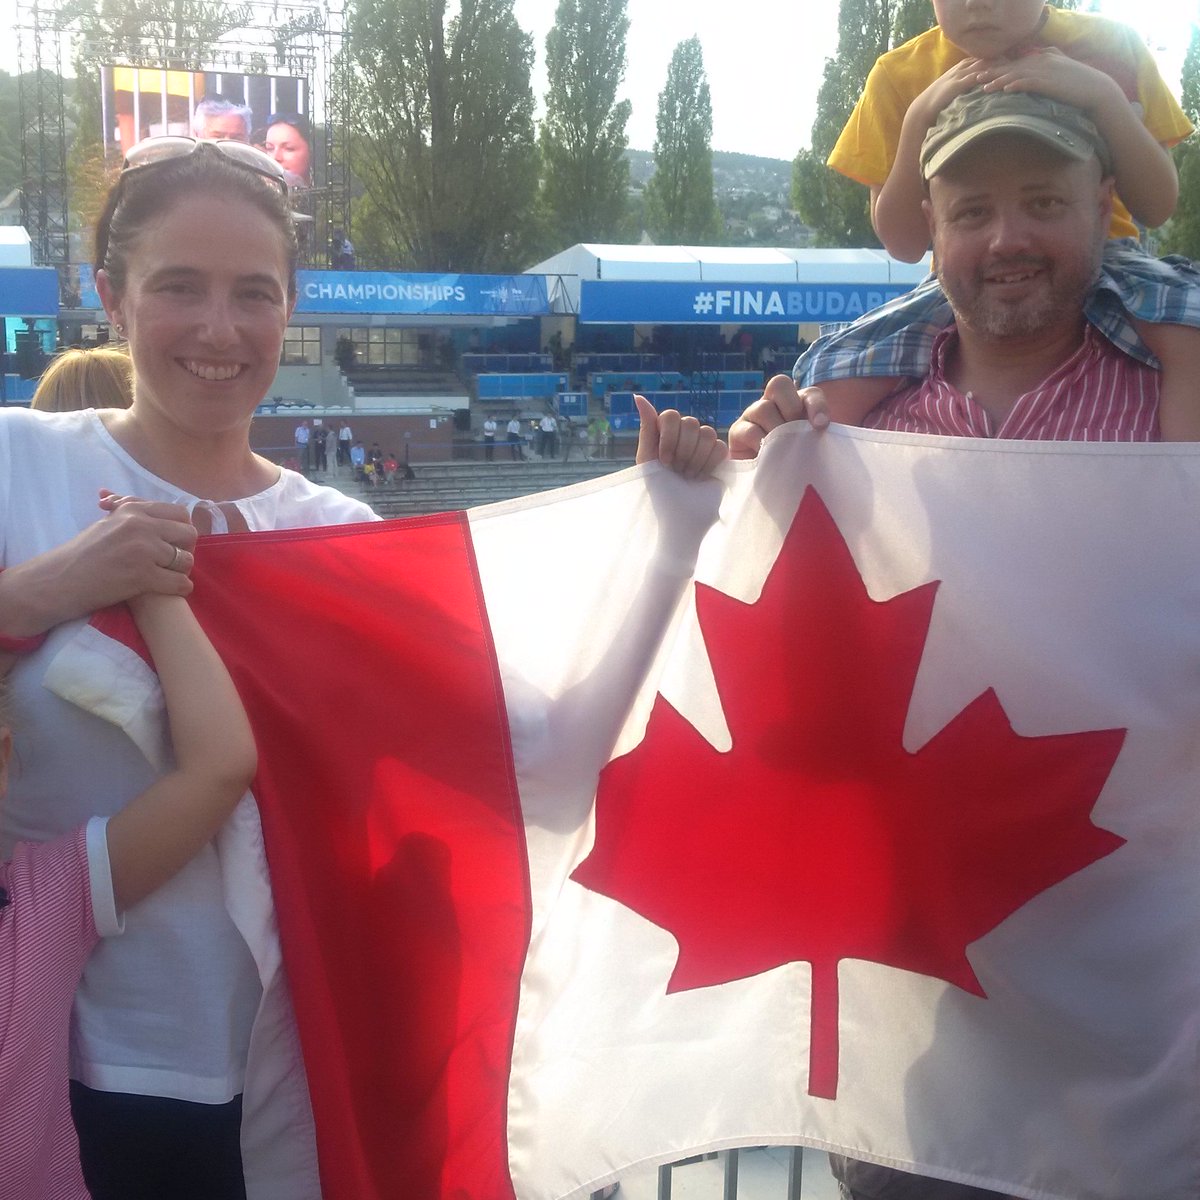 Cheering for #Canadian athletes at #FinaBp2017 w the President of @ChamberCanadian in Hungary #CCCH. #AllezLeCanada!